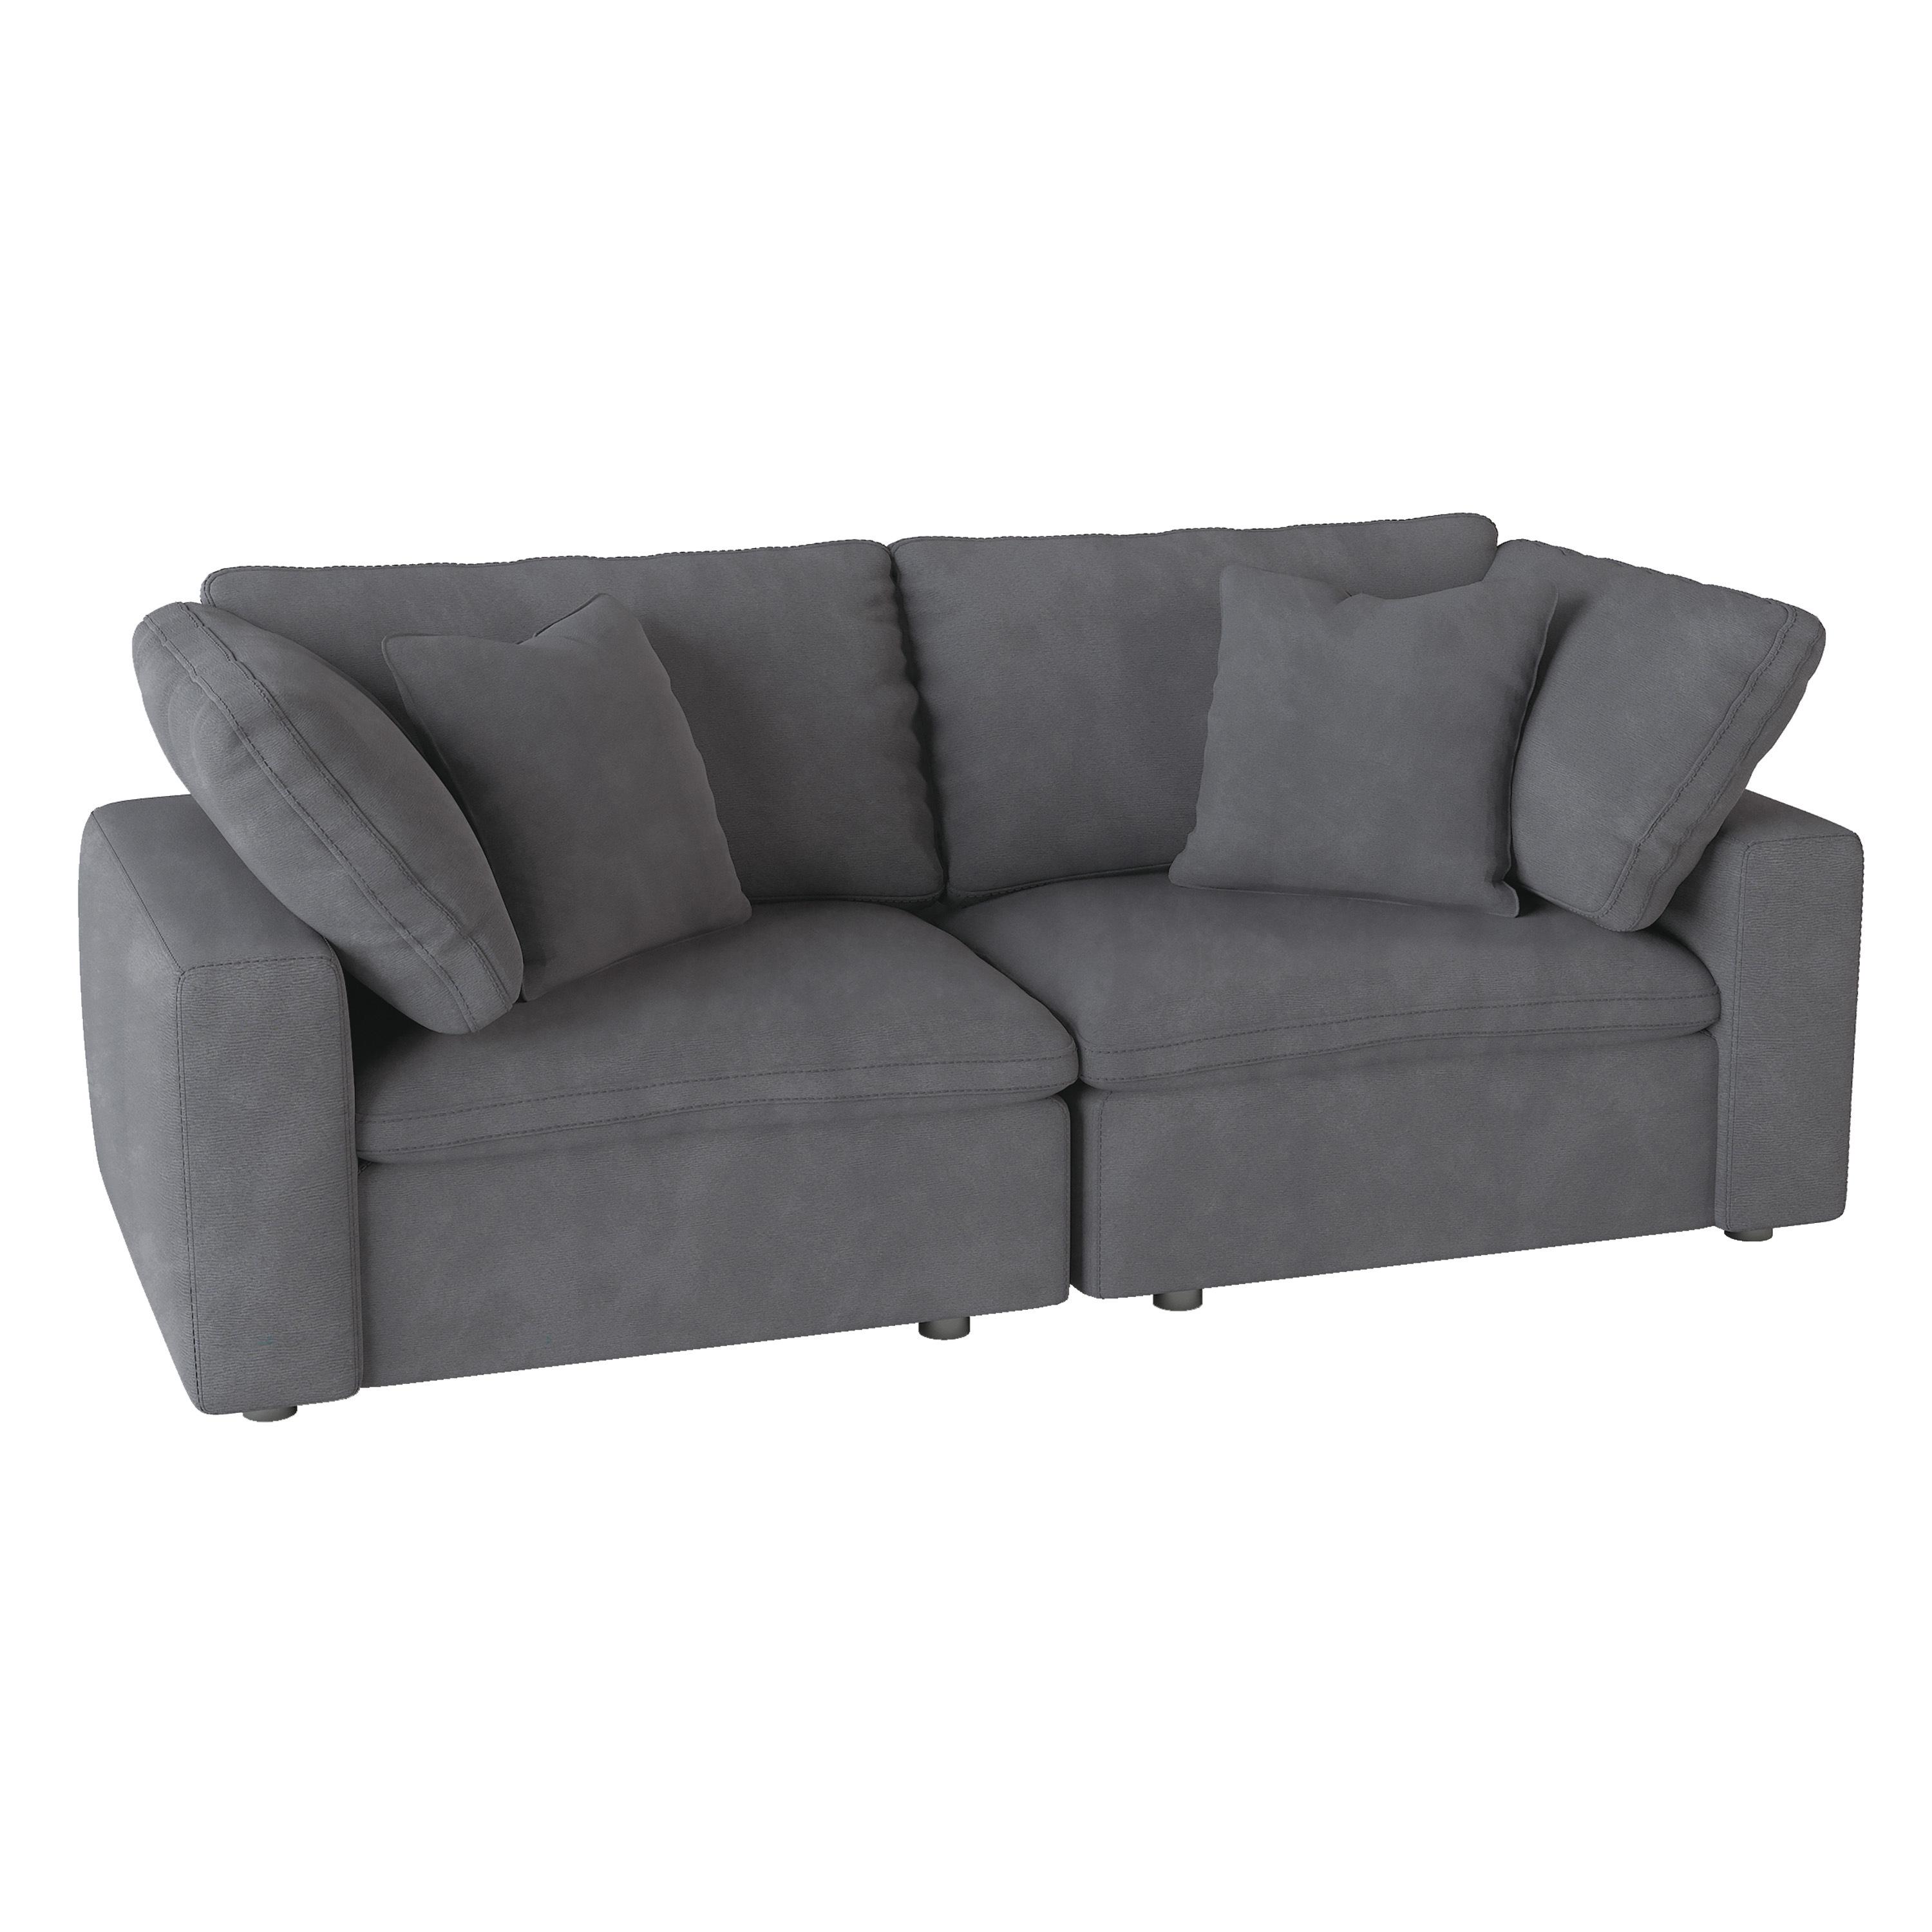 

    
Transitional Gray Microfiber 2-Piece Loveseat Homelegance 9546GY-2* Guthrie
